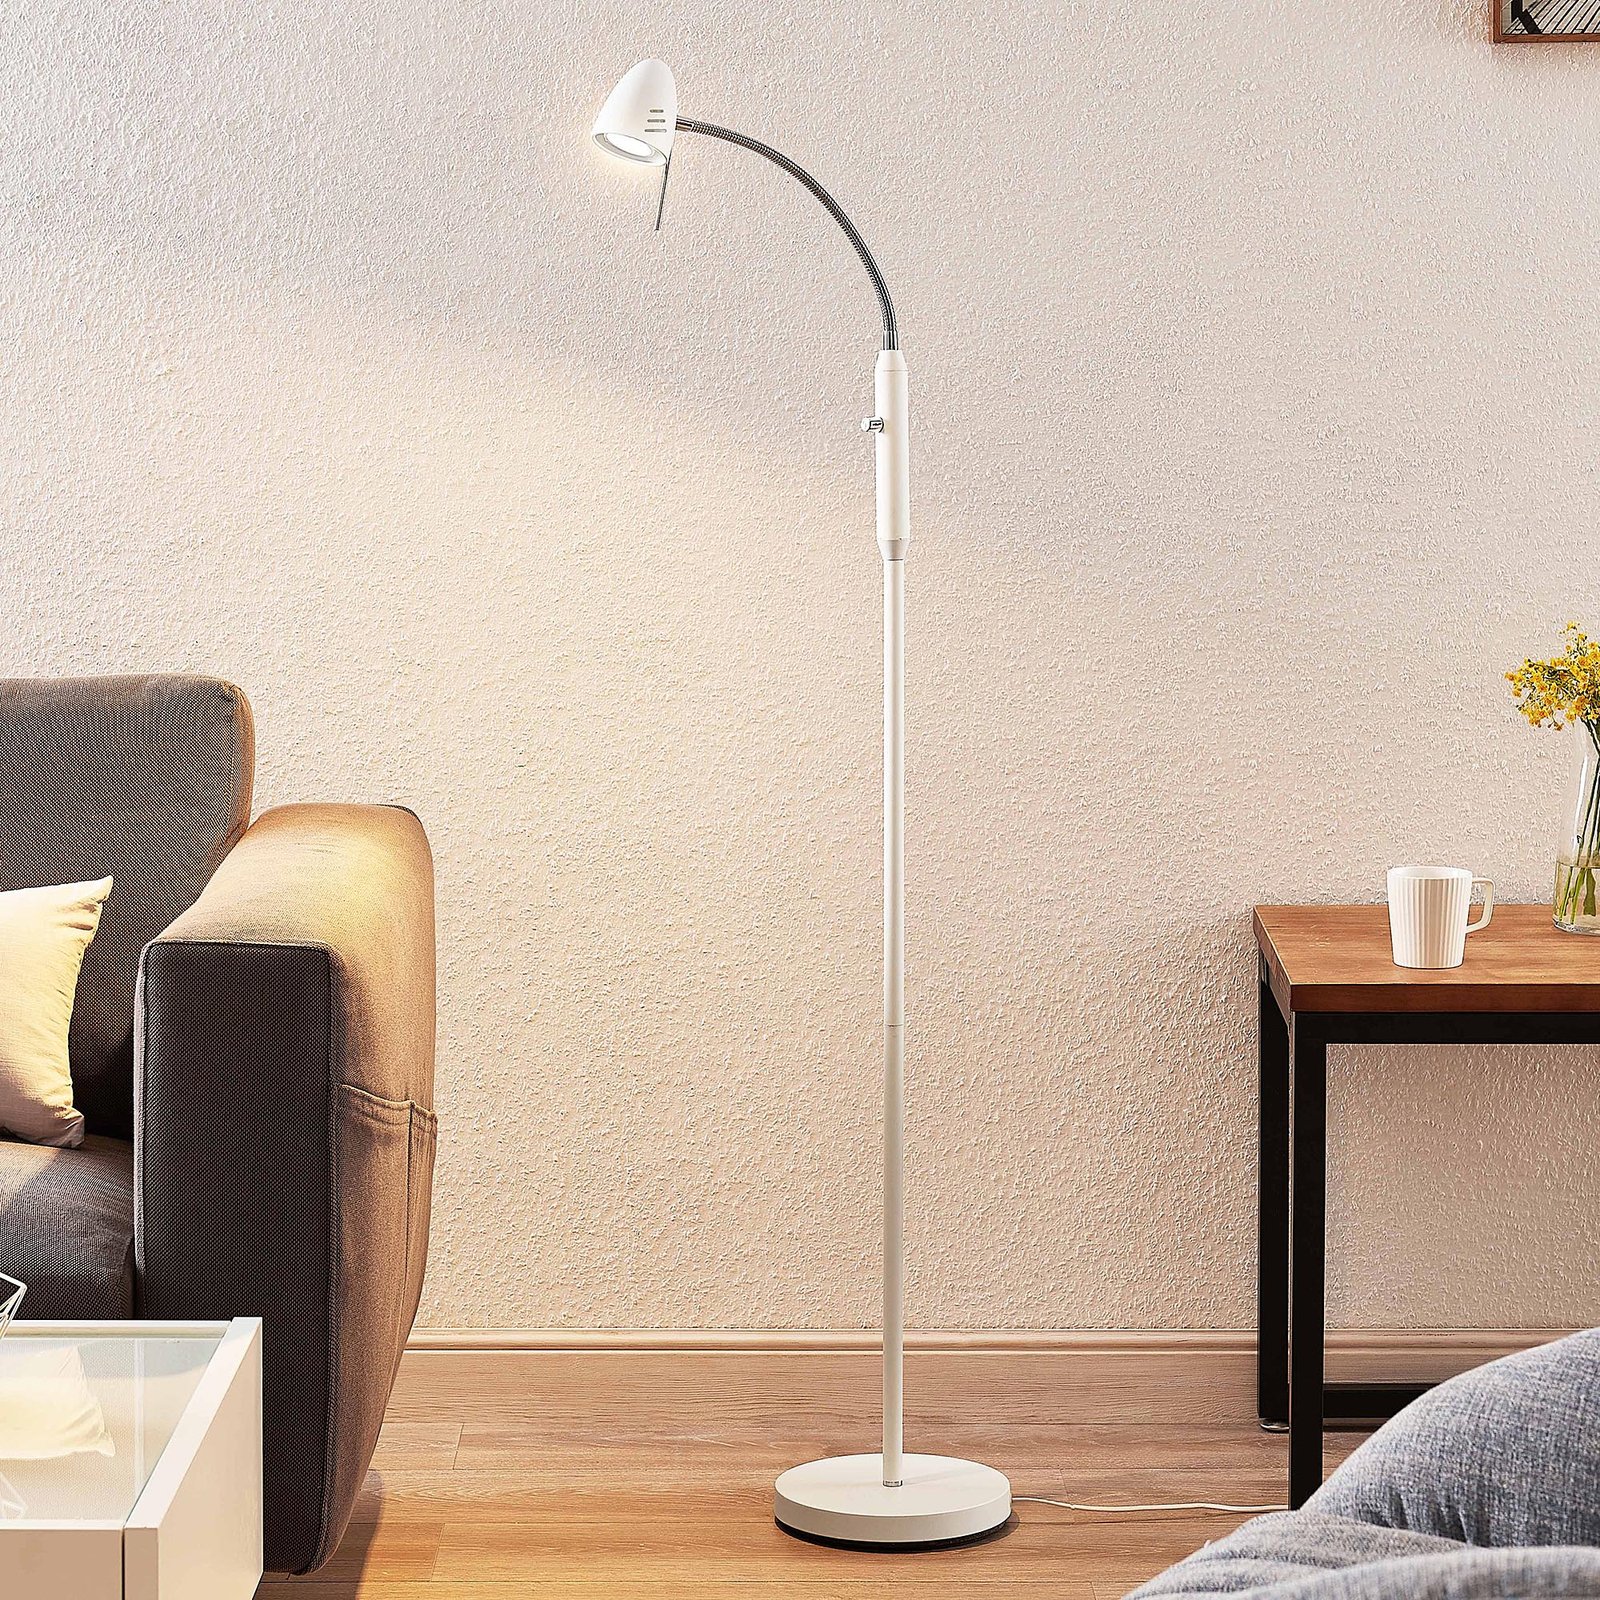 Lindby Heyko lampe sur pied, dimmable, à 1 lampe